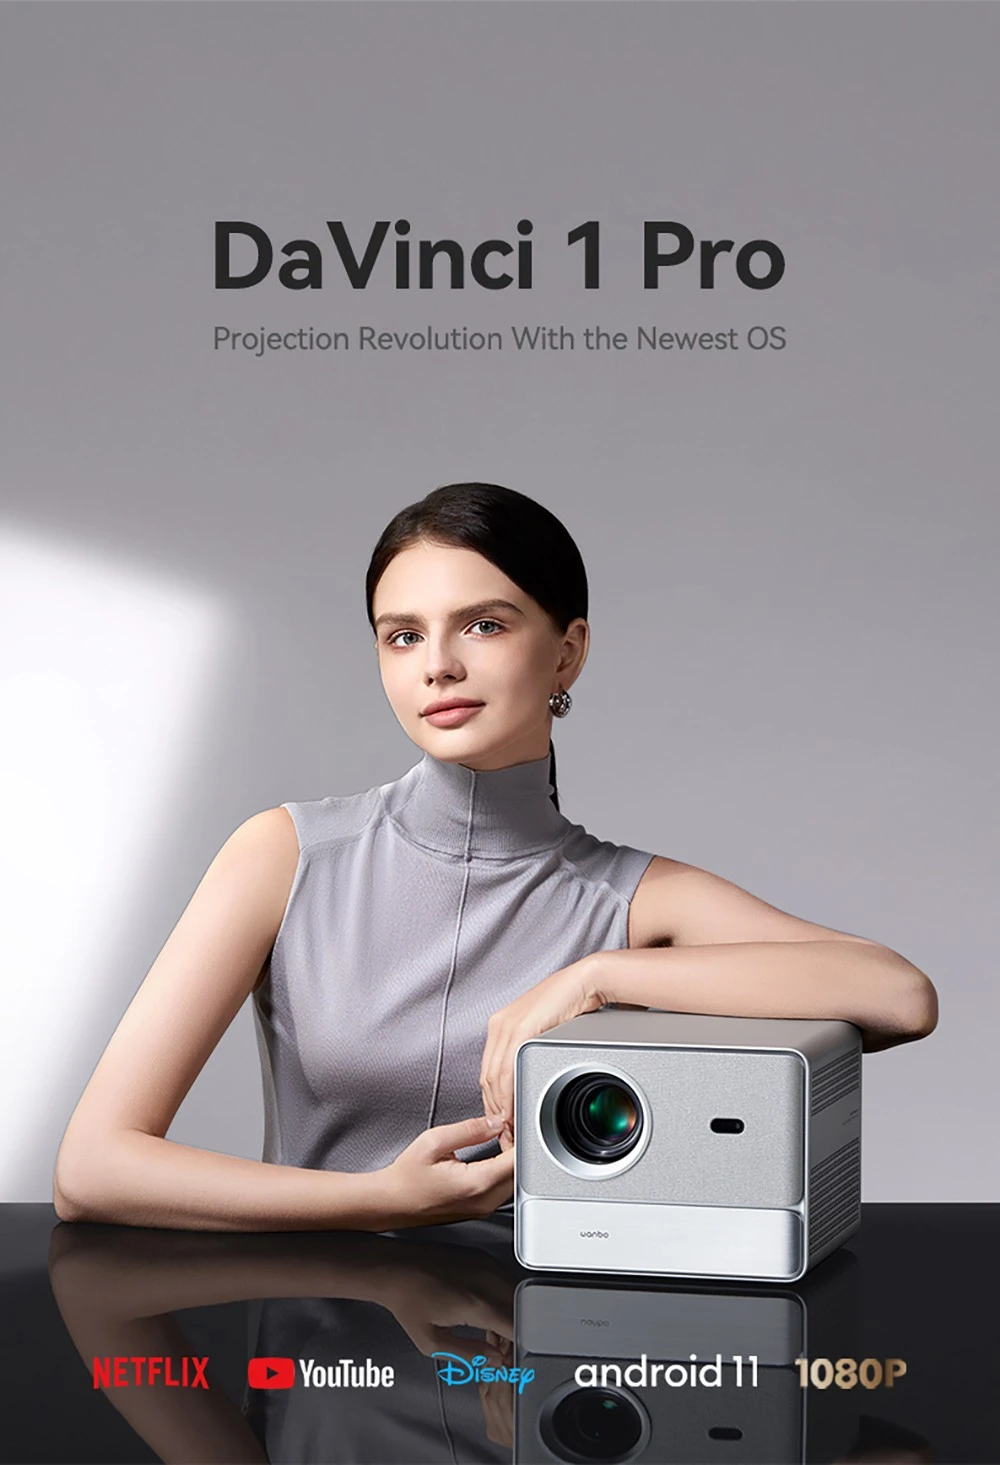 [Netflix Certified] WANBO DaVinci 1 Pro Projector, 600 ANSI, Native 1080P, Android 11, 5G/2.4G WiFi, Auto-Focus/Auto Keystone Correction/Auto Screen Fit/Obstacle Avoidance